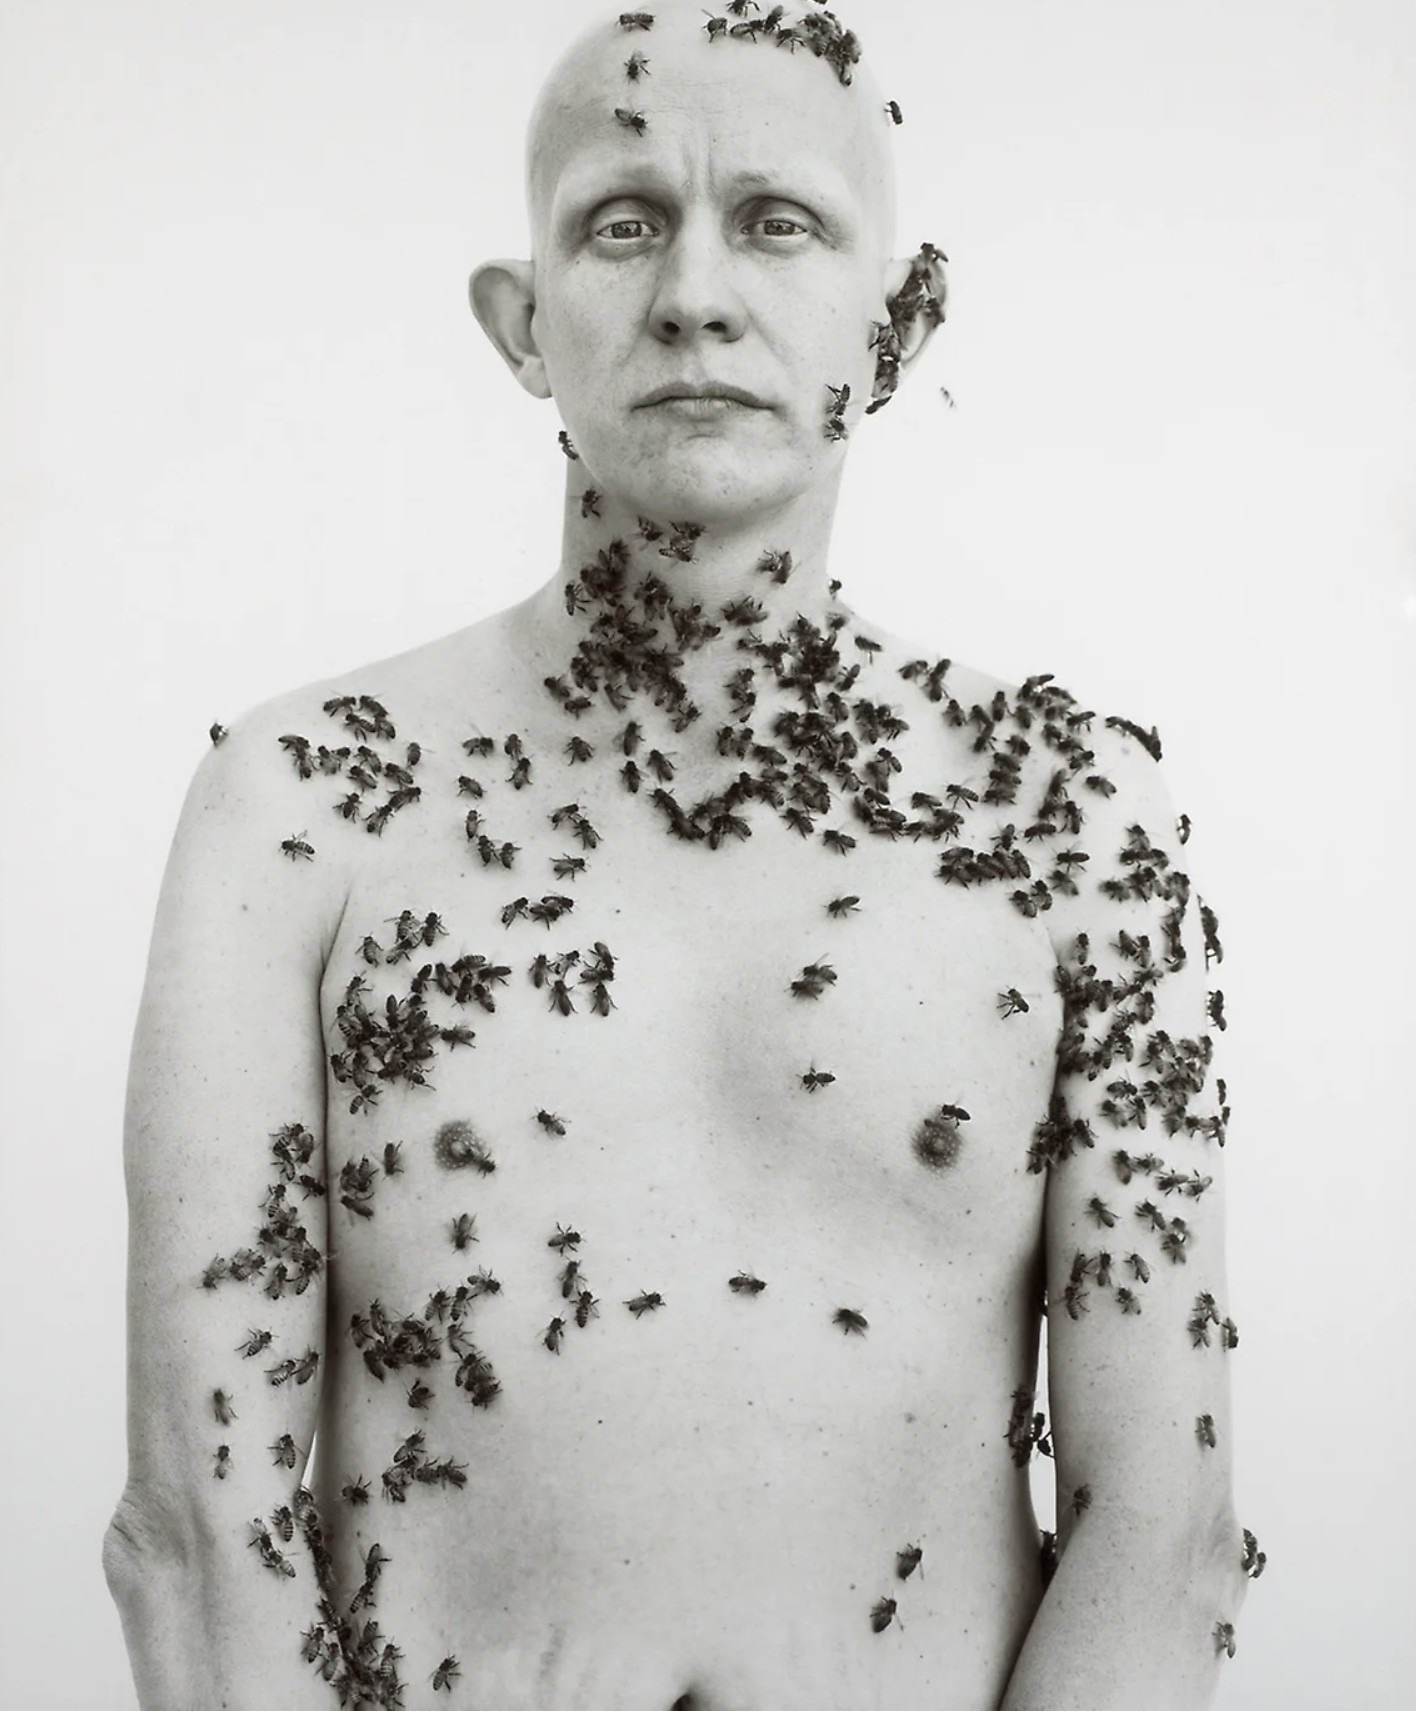 Shirtless beekeeper covered in bees